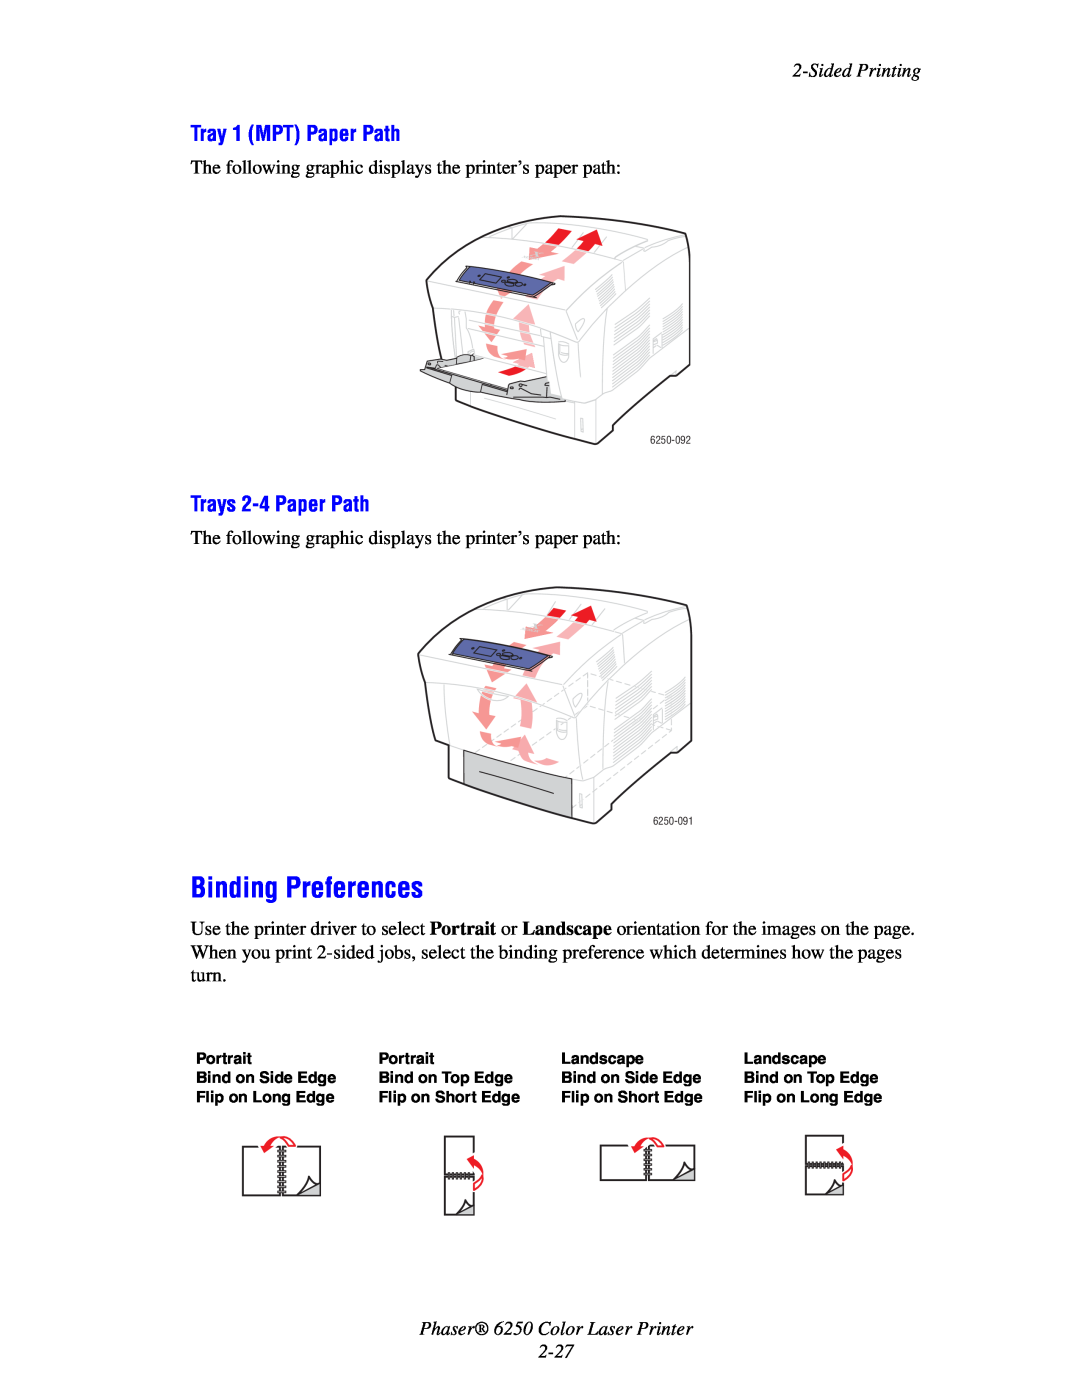 Xerox 6250 manual Binding Preferences, Tray 1 MPT Paper Path, Trays 2-4 Paper Path, Sided Printing 